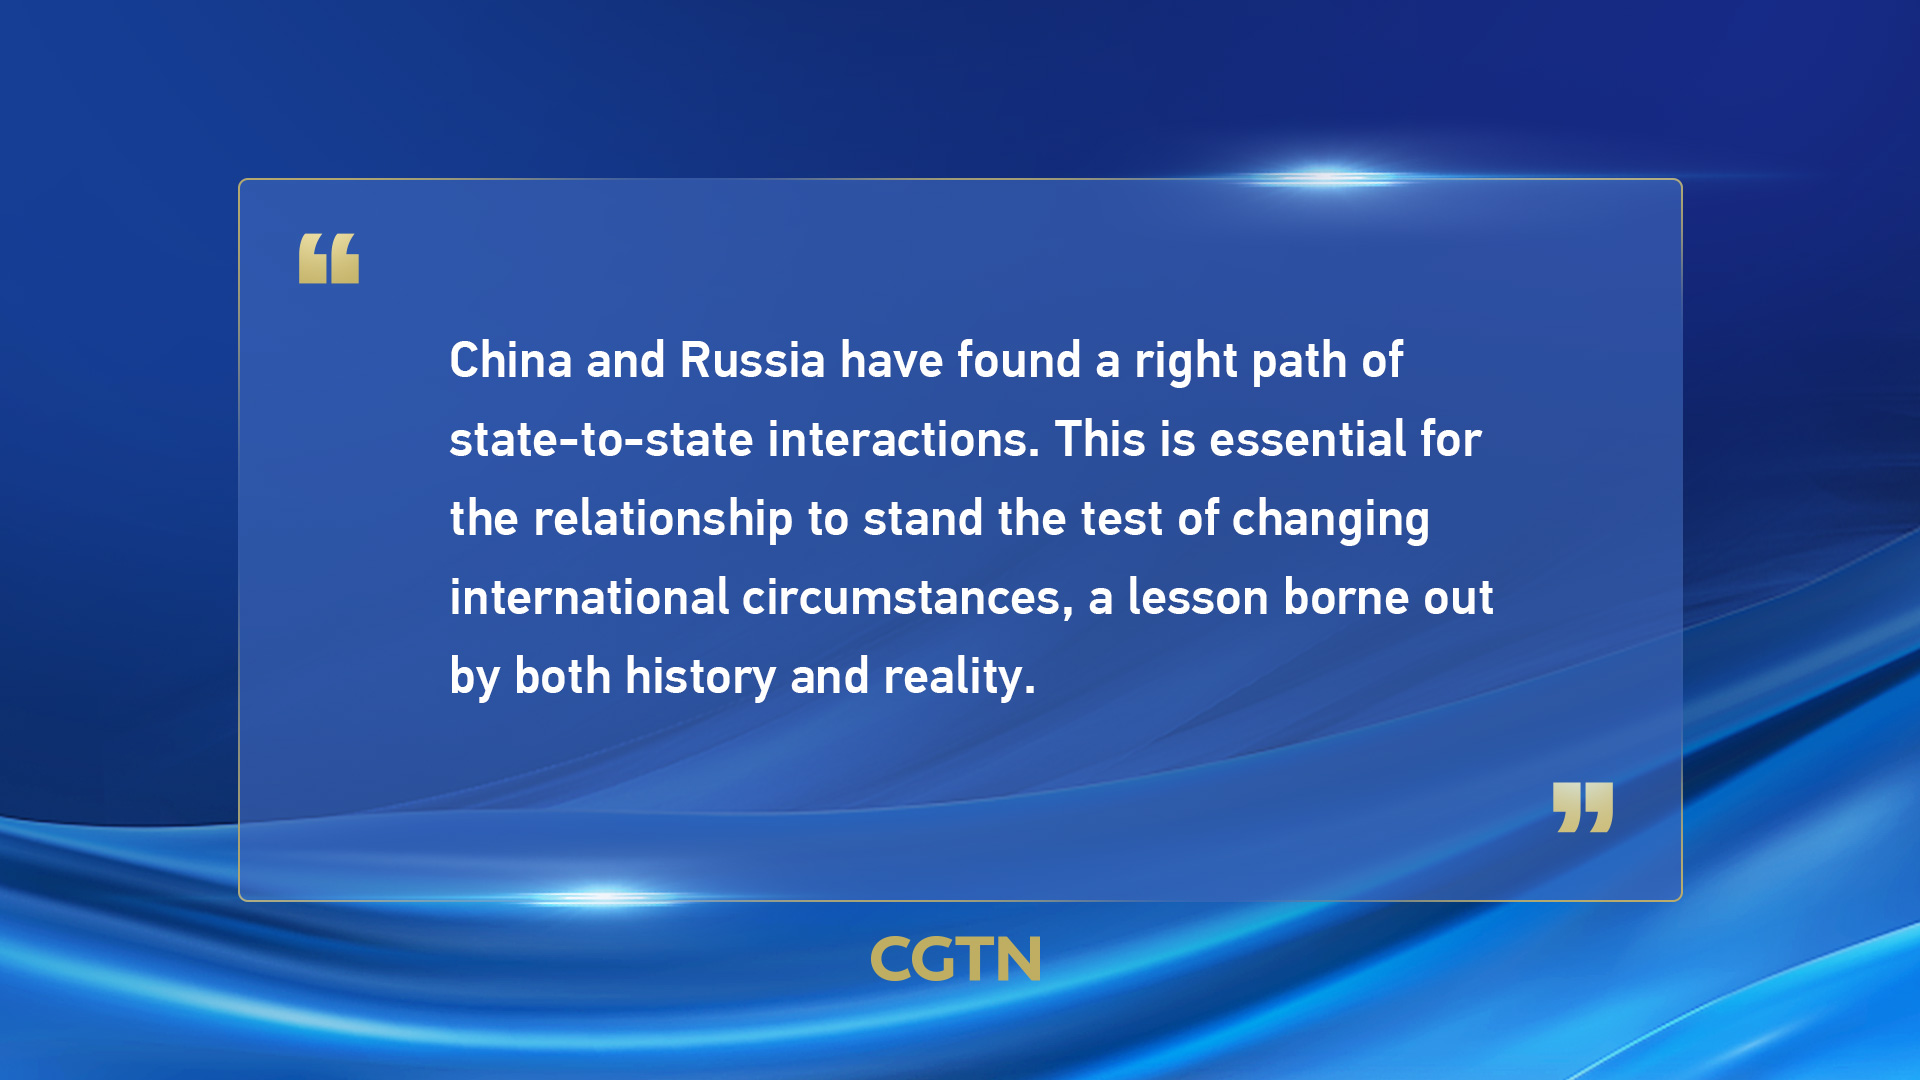 Xi Jinping's key quotes on China-Russia ties